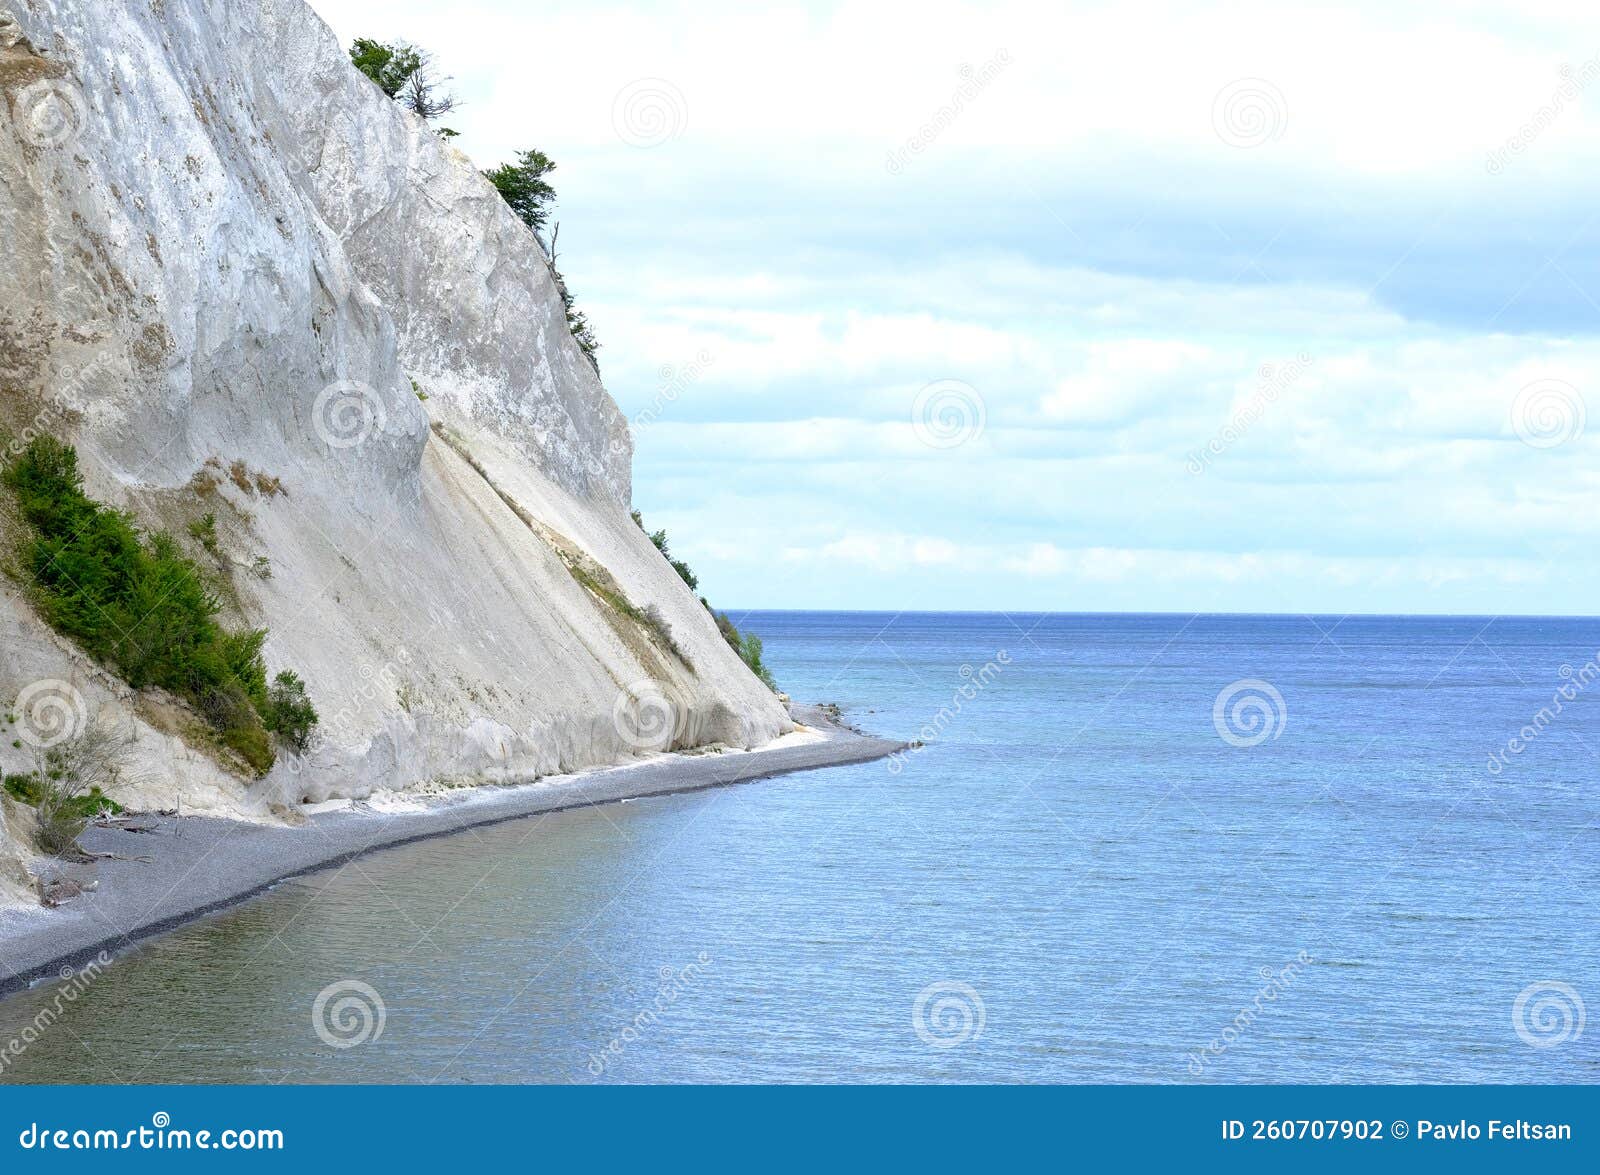 a beautiful view of mons klint, the highest cliff in denmark, limestone